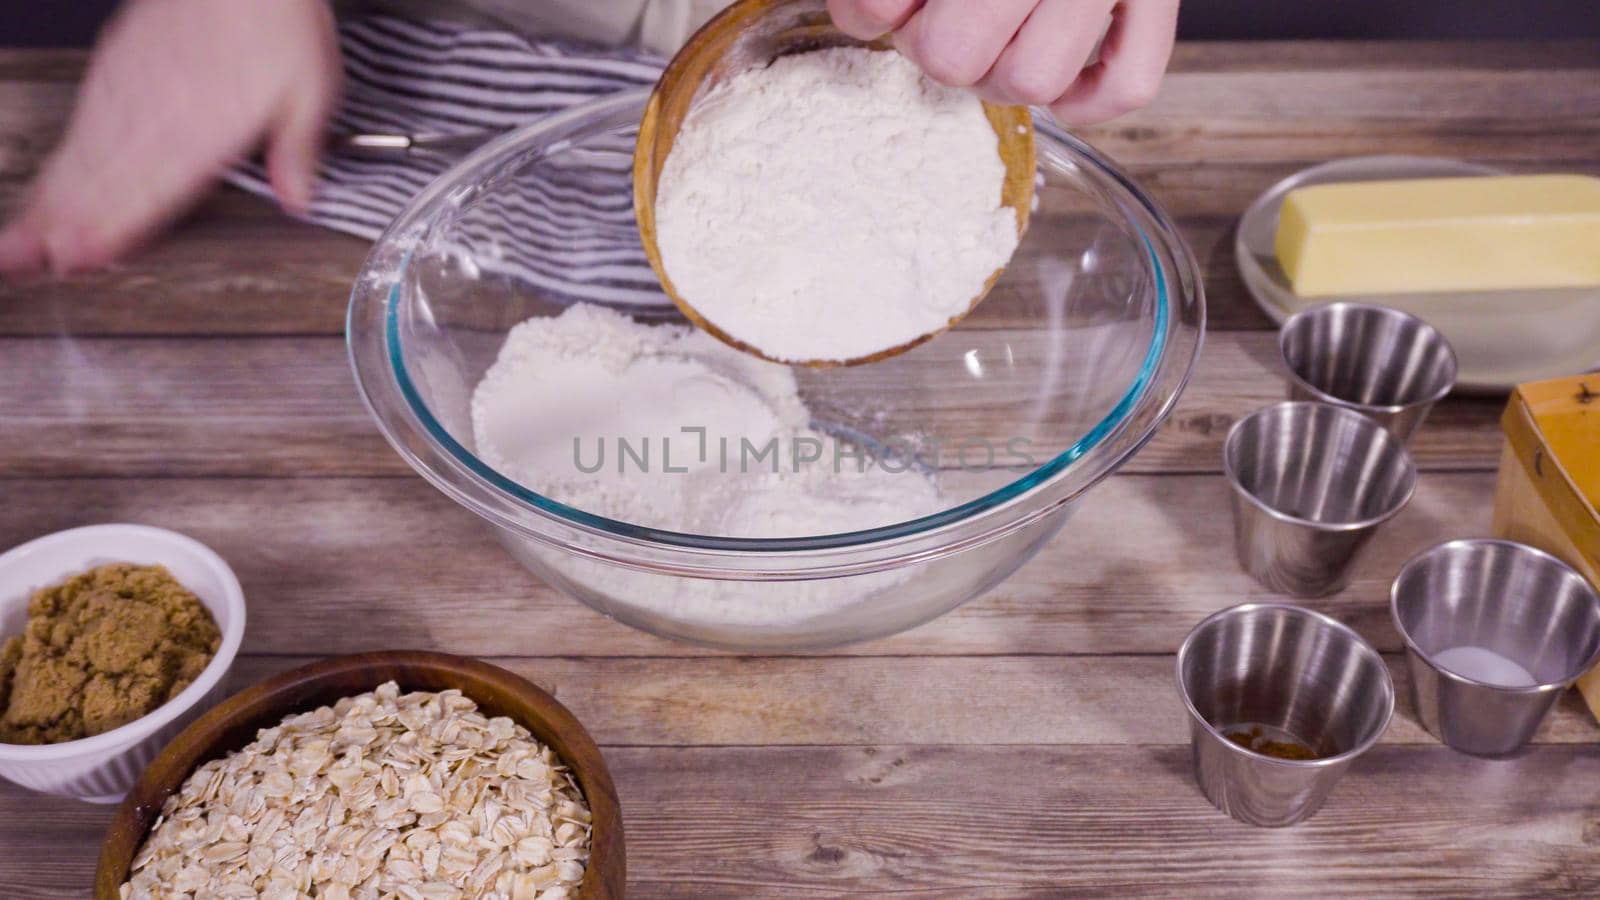 Step by step. Mixing ingredients to bake oatmeal raising cookies in a glass mixing bowl.